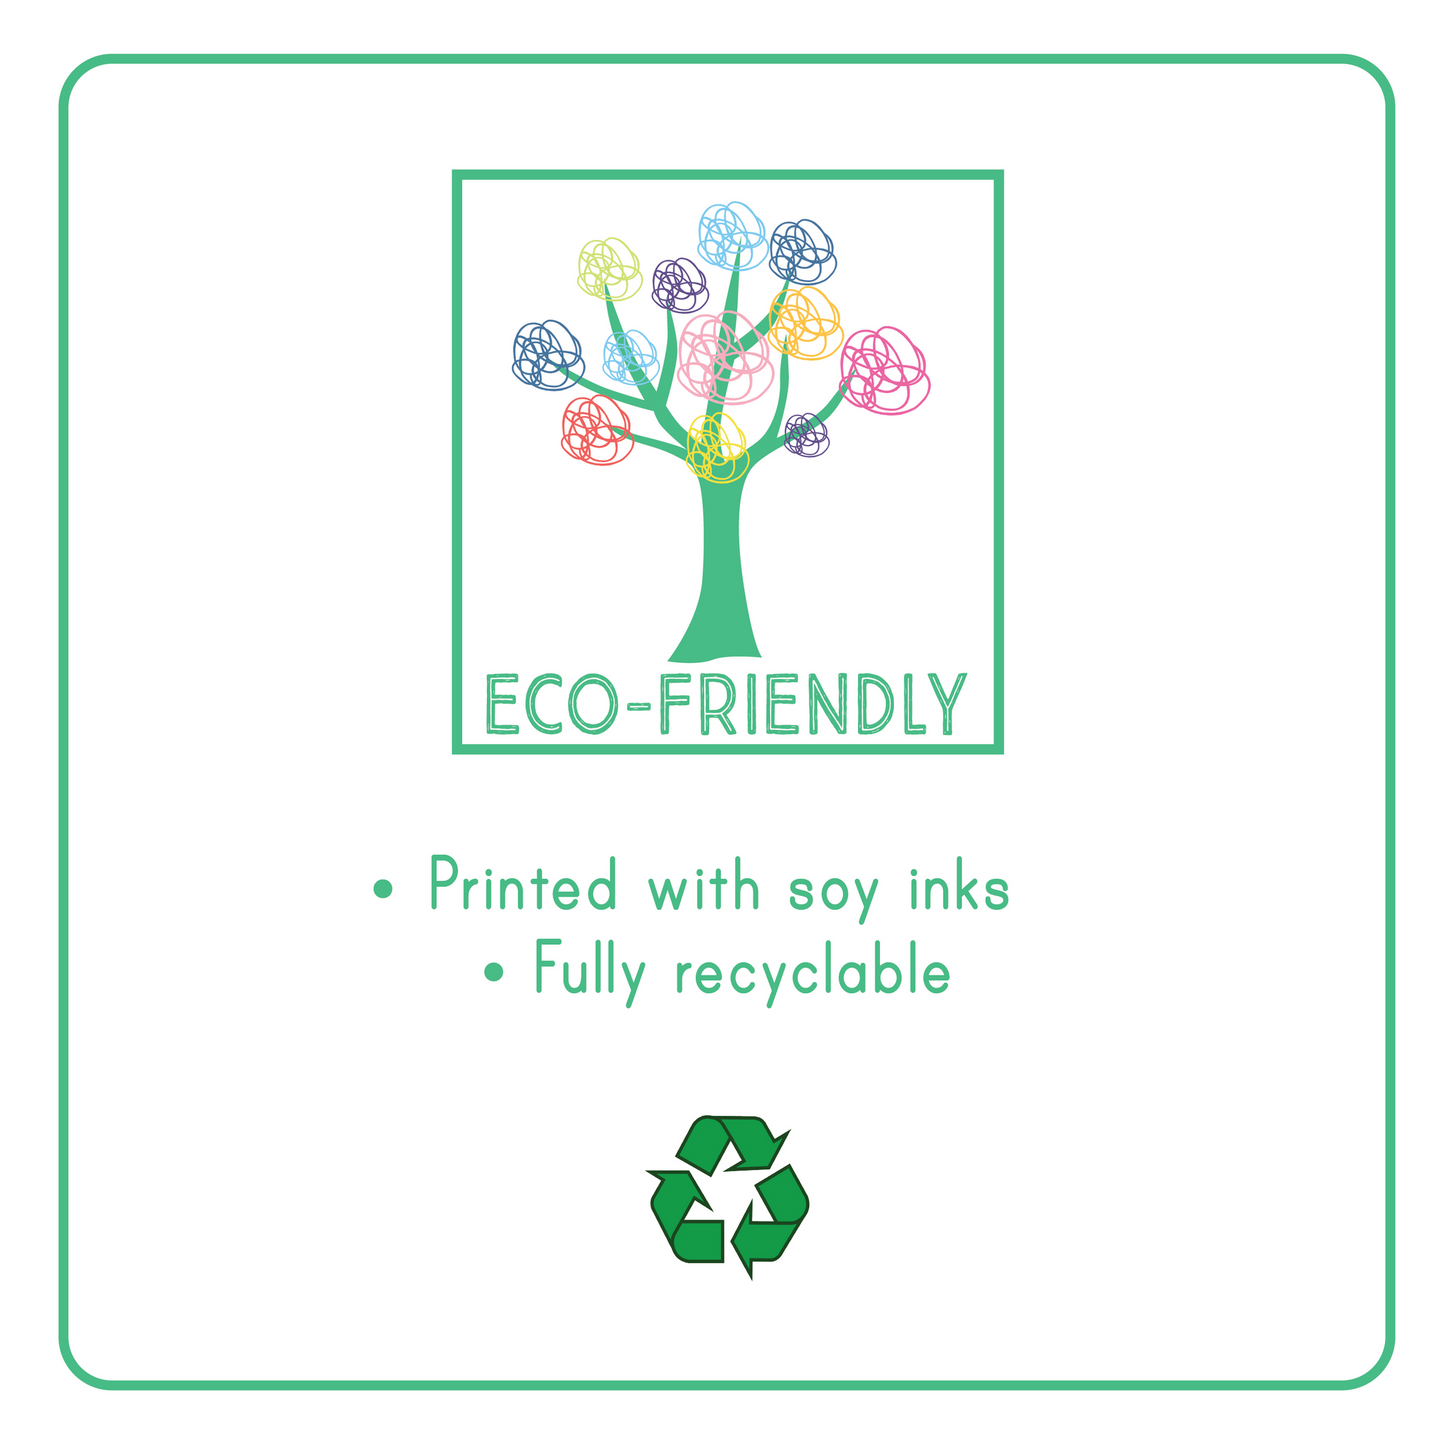 eco friendly, printed with soy inks, fully recyclable